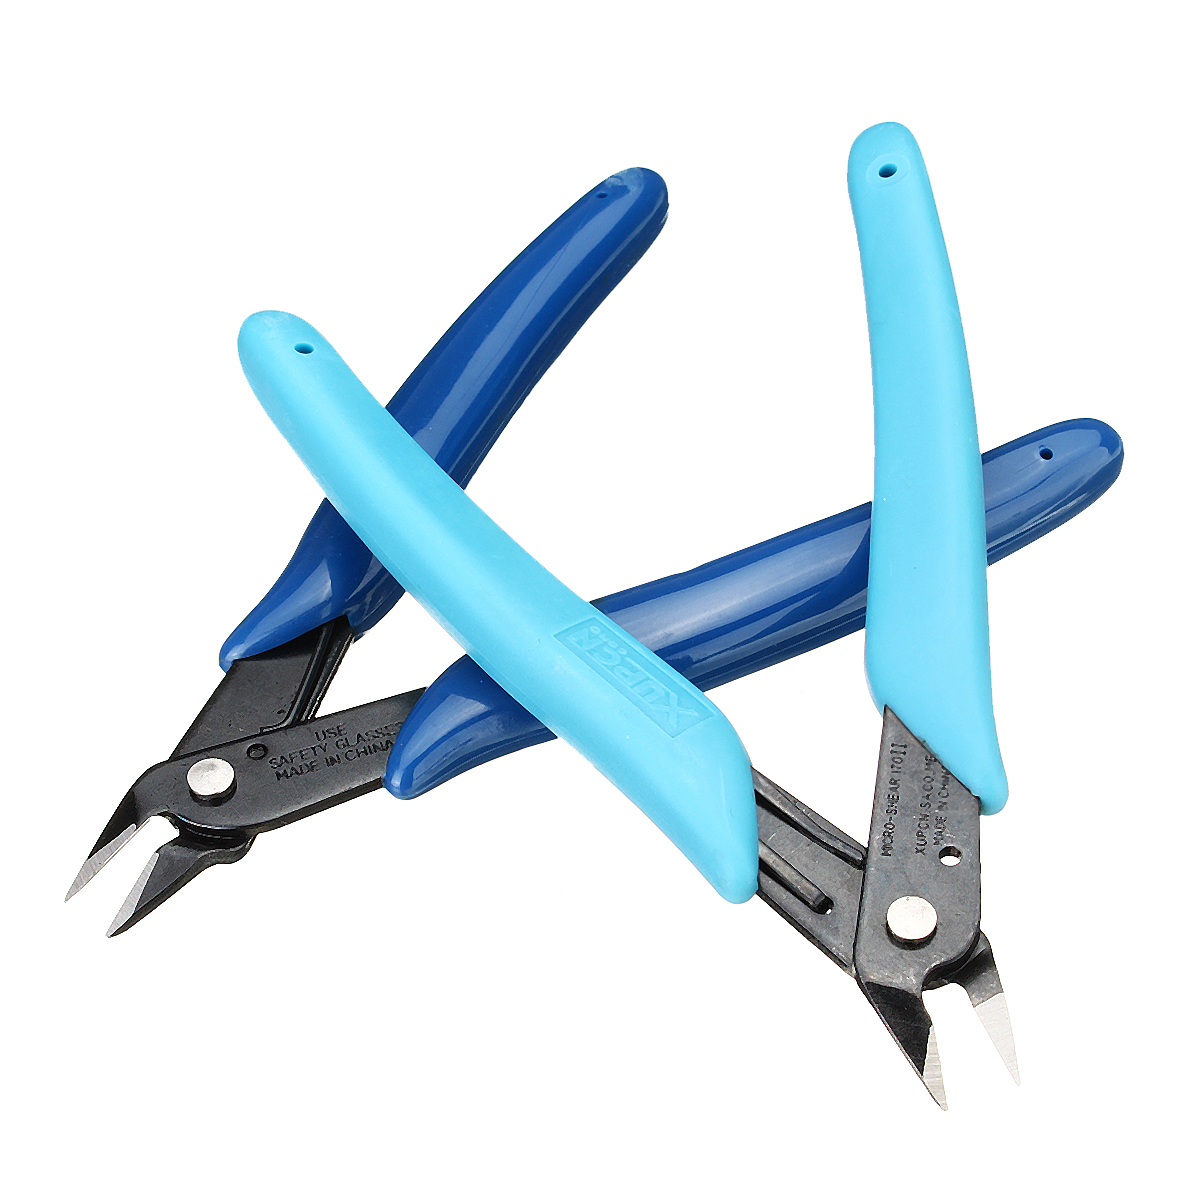 Pliers-Nipper-H-Practical-Electrical-Wire-Cable-Cutter-Cutting-Side-Snips-Flush-Pliers-Mini-Pliers-1371806-5